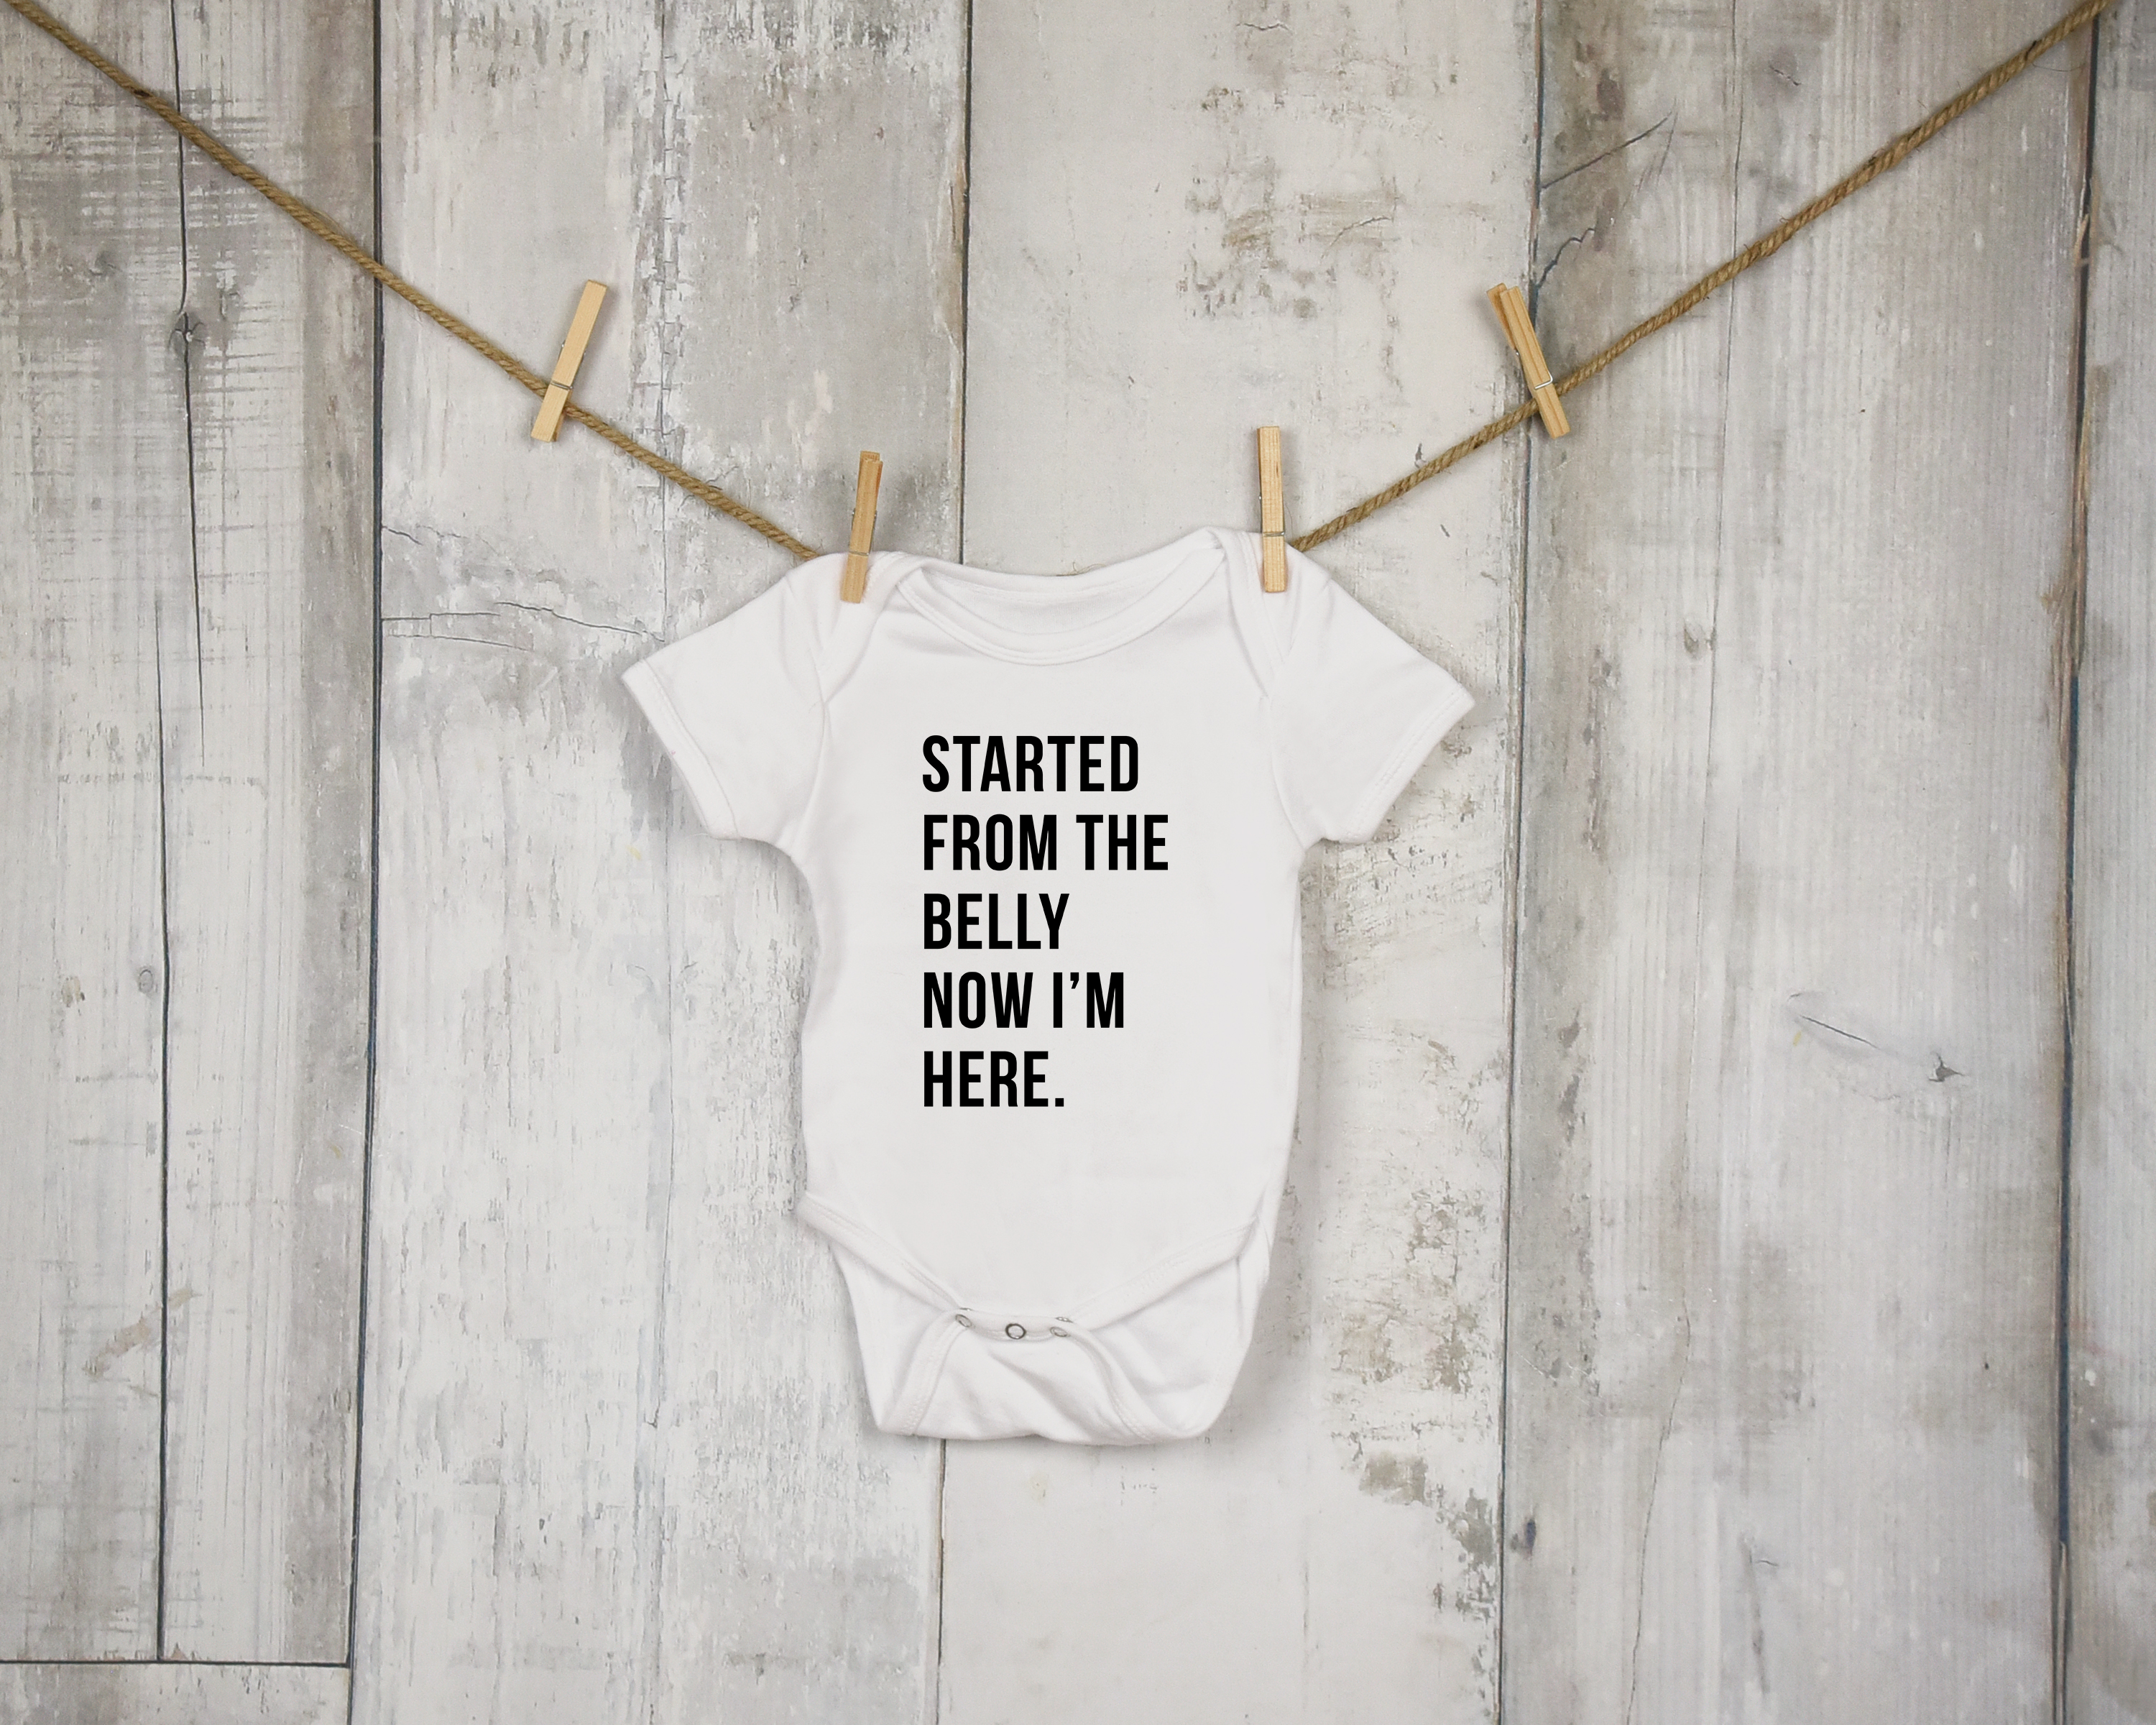 https://www.helpmefindlove.net/wp-content/uploads/2017/11/started-from-the-belly-onsie-cute-newborn-onsie-outfit-baby-shower-gift-baby-shower-decor-gender-reveal-gift-new-mom-gift-newborn-baby-gifts.png